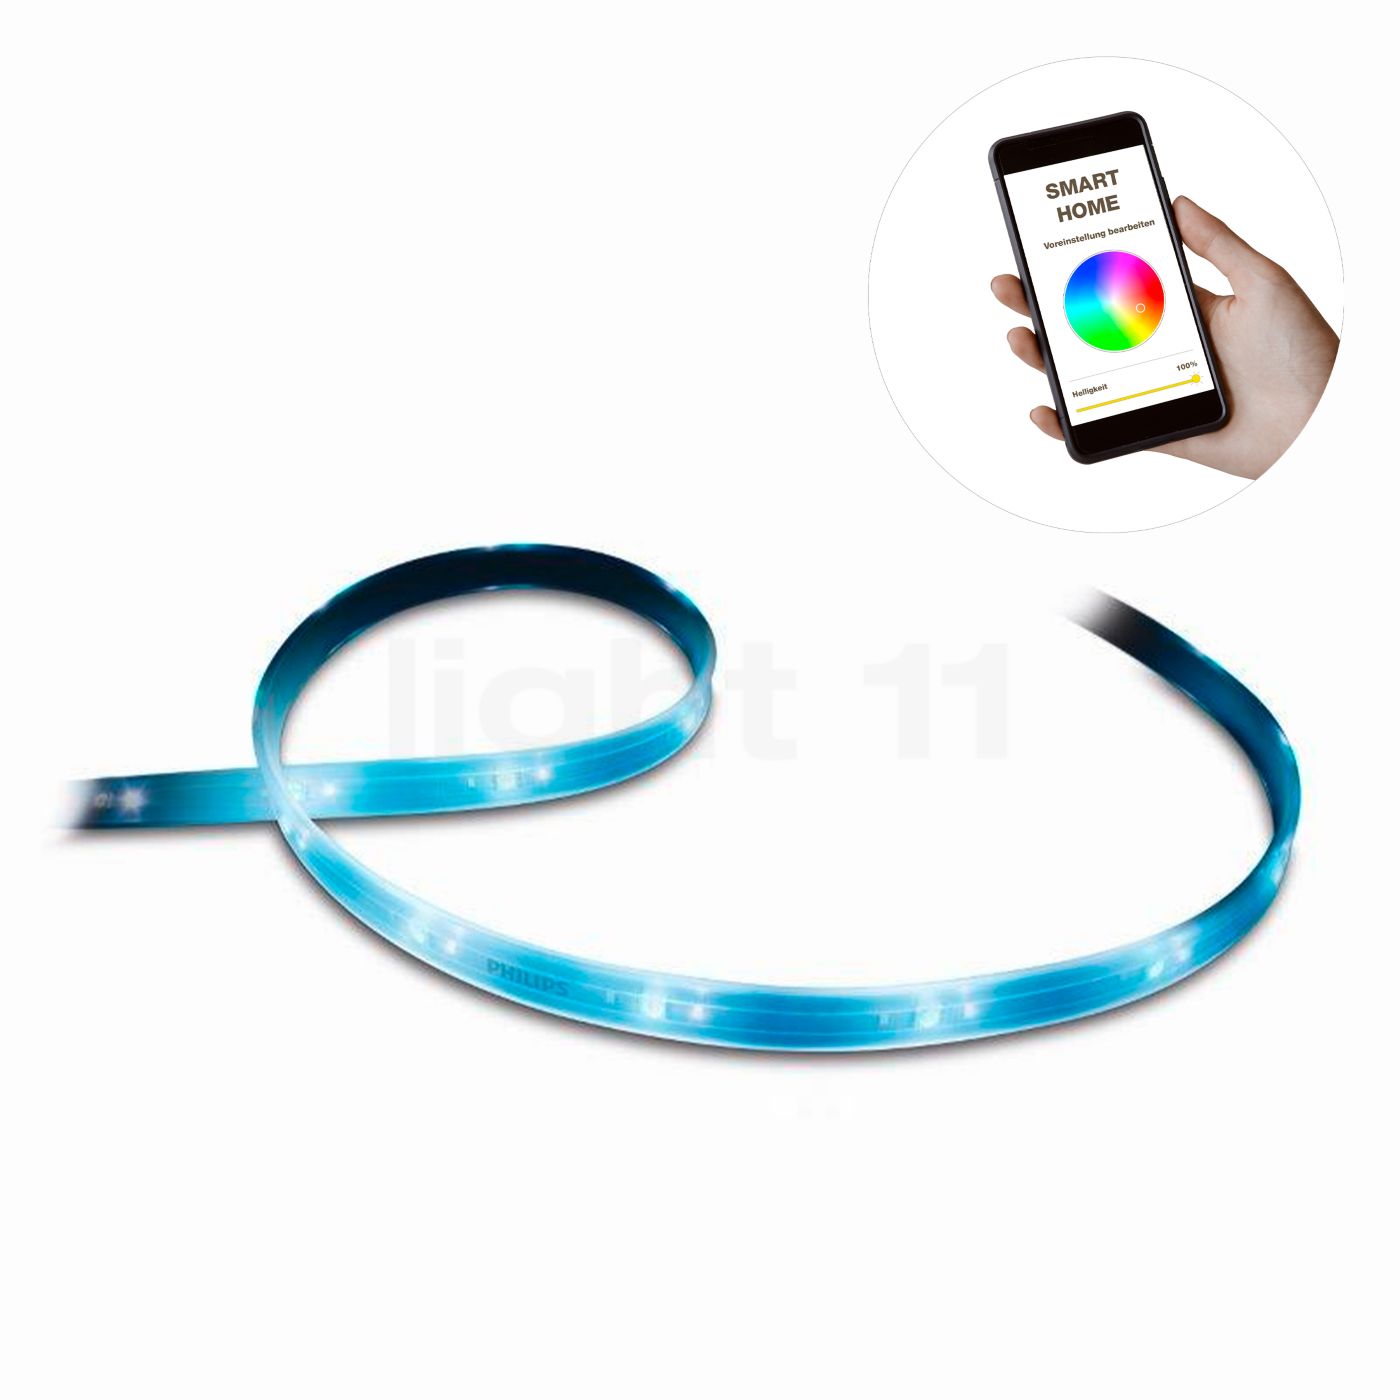 Philips Hue White and Color Ambiance Lightstrip Plus 1 m LED Erweiterung 1 m Produktbild